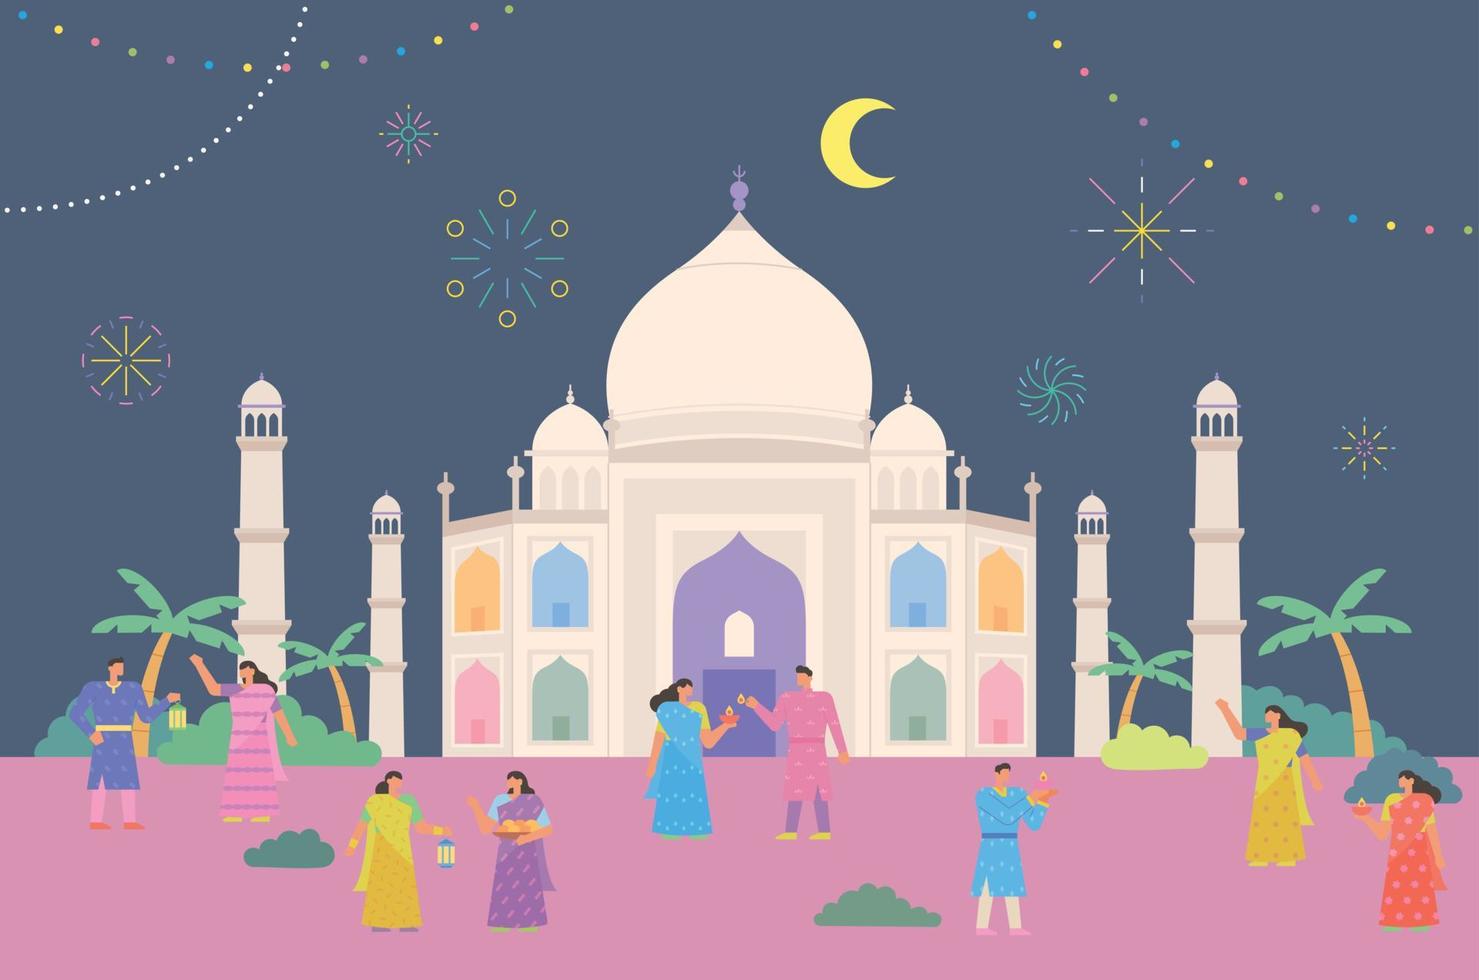 Many people enjoying the festival in front of the Taj Mahal in India. vector